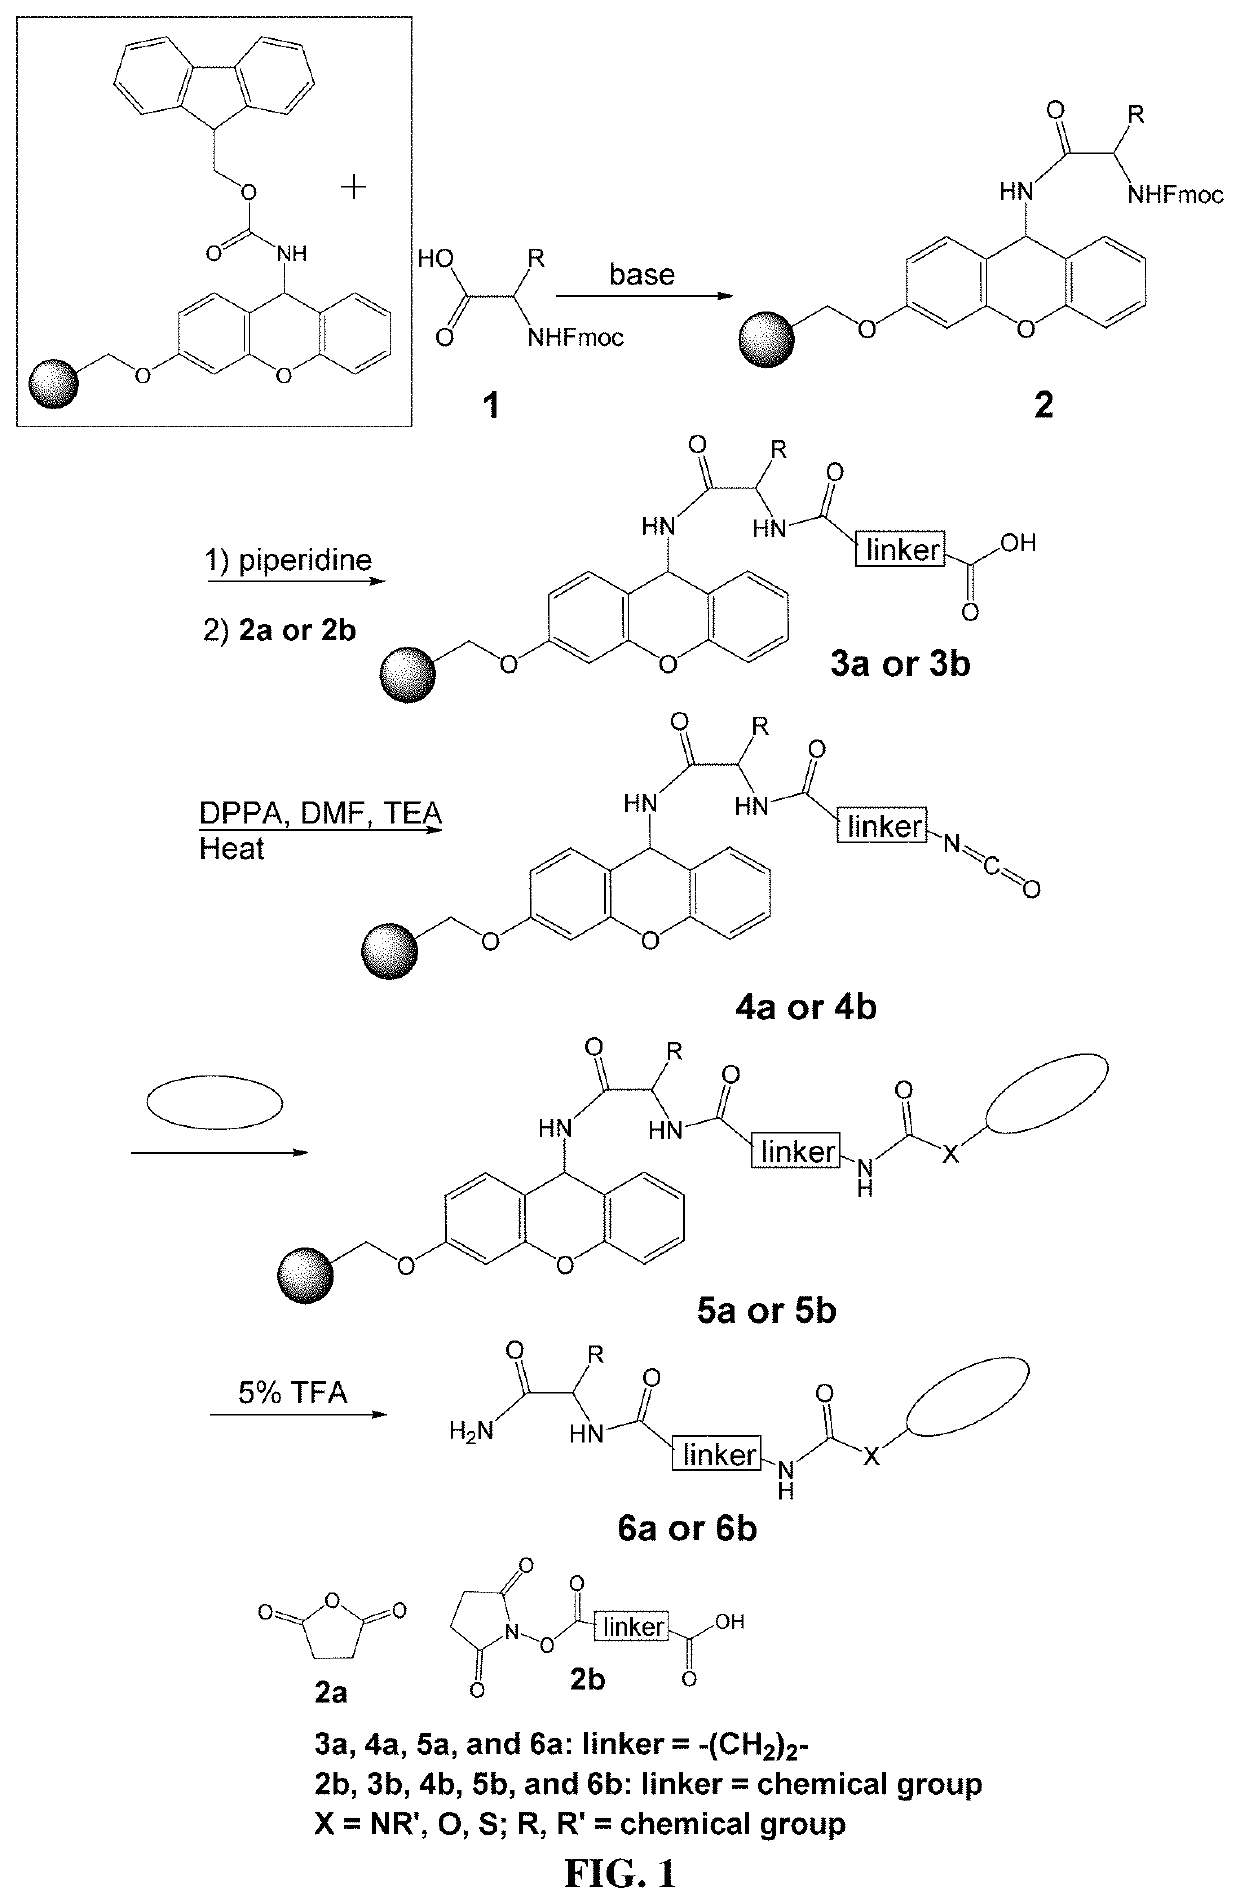 High-throughput method to rapidly add chemical moieties to a small molecule library